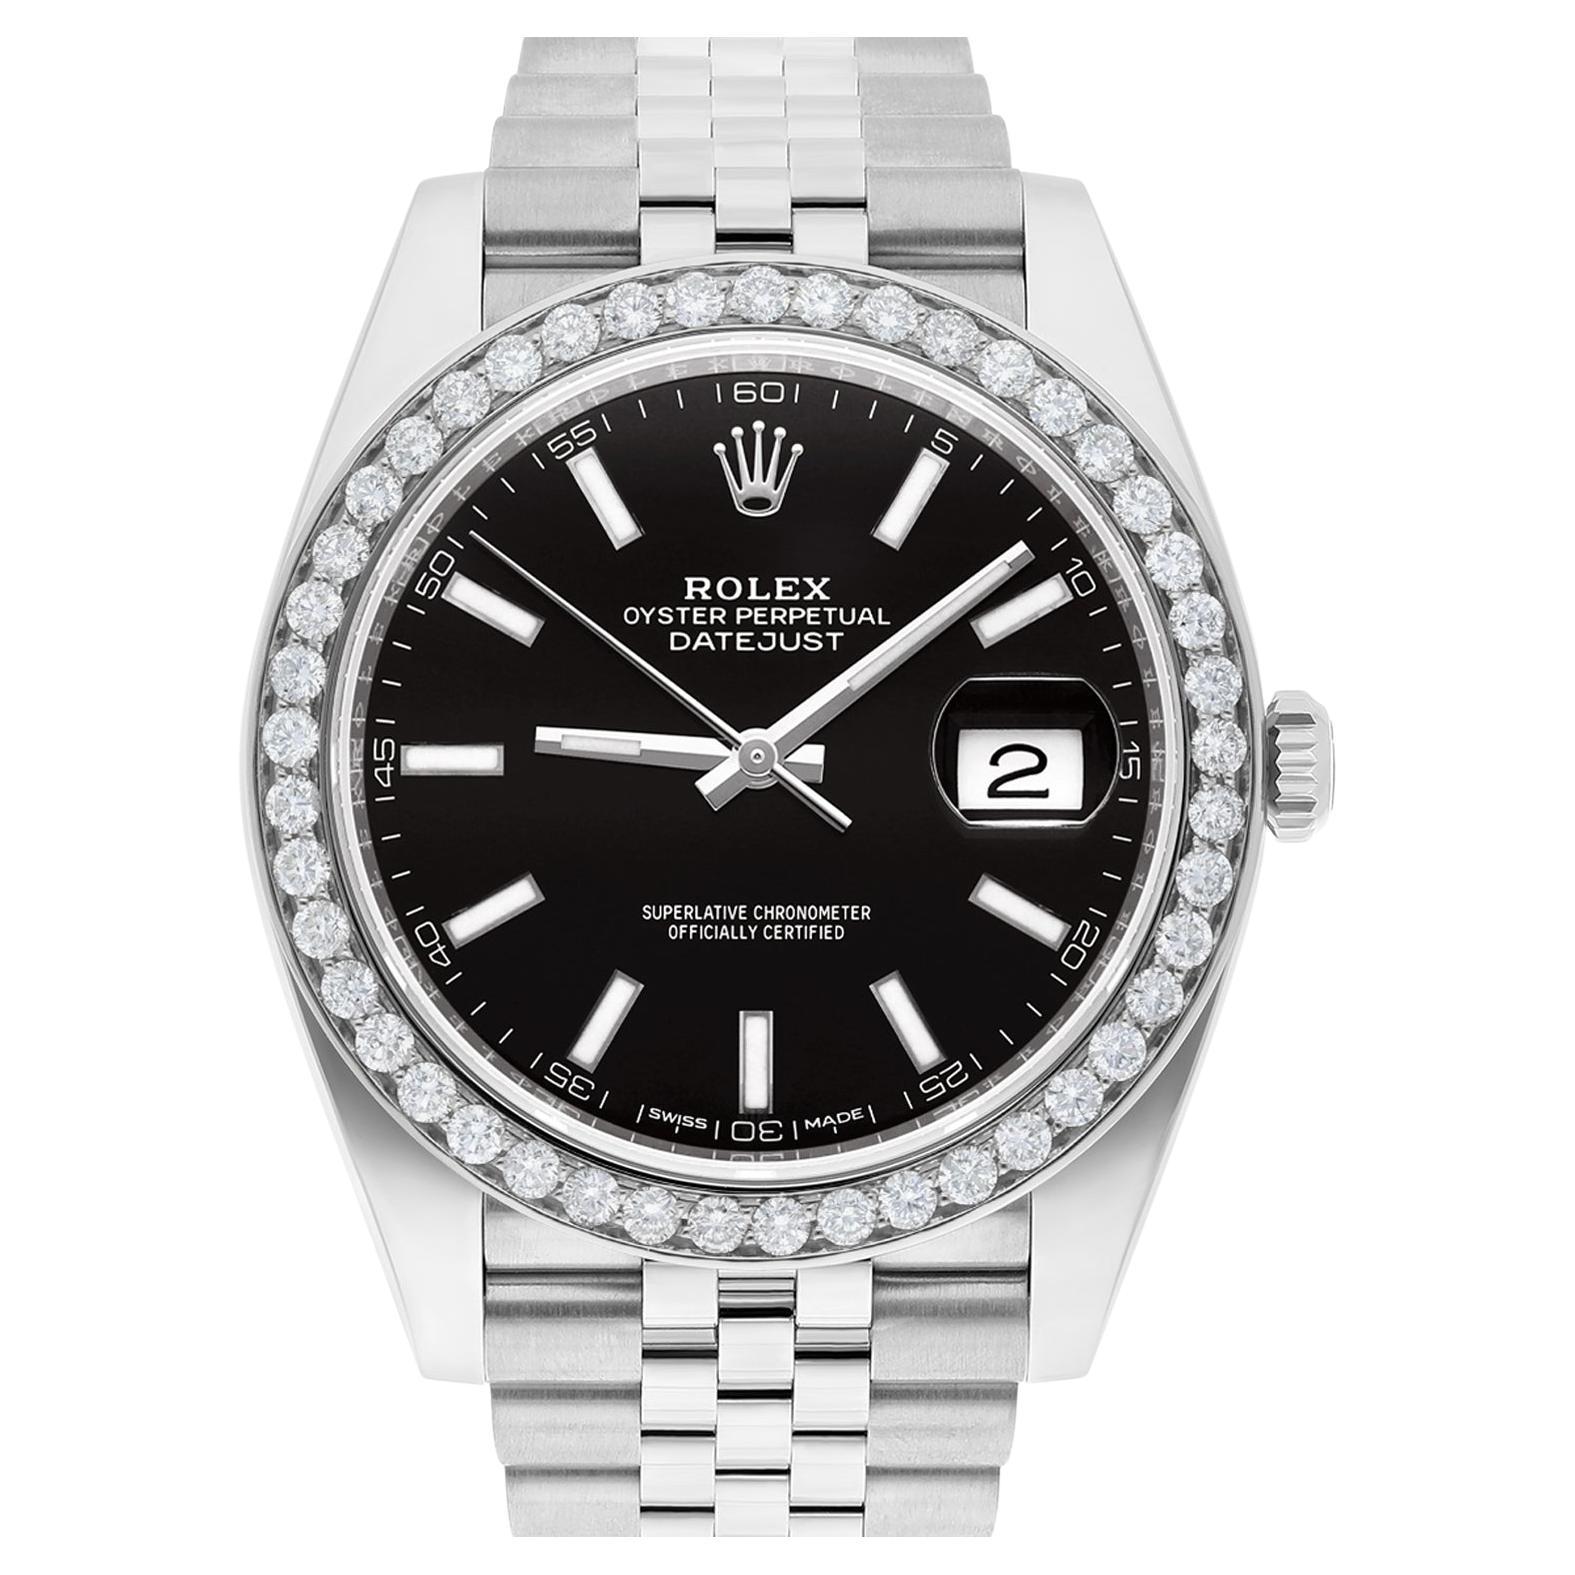 How do I wind a Rolex Oyster?